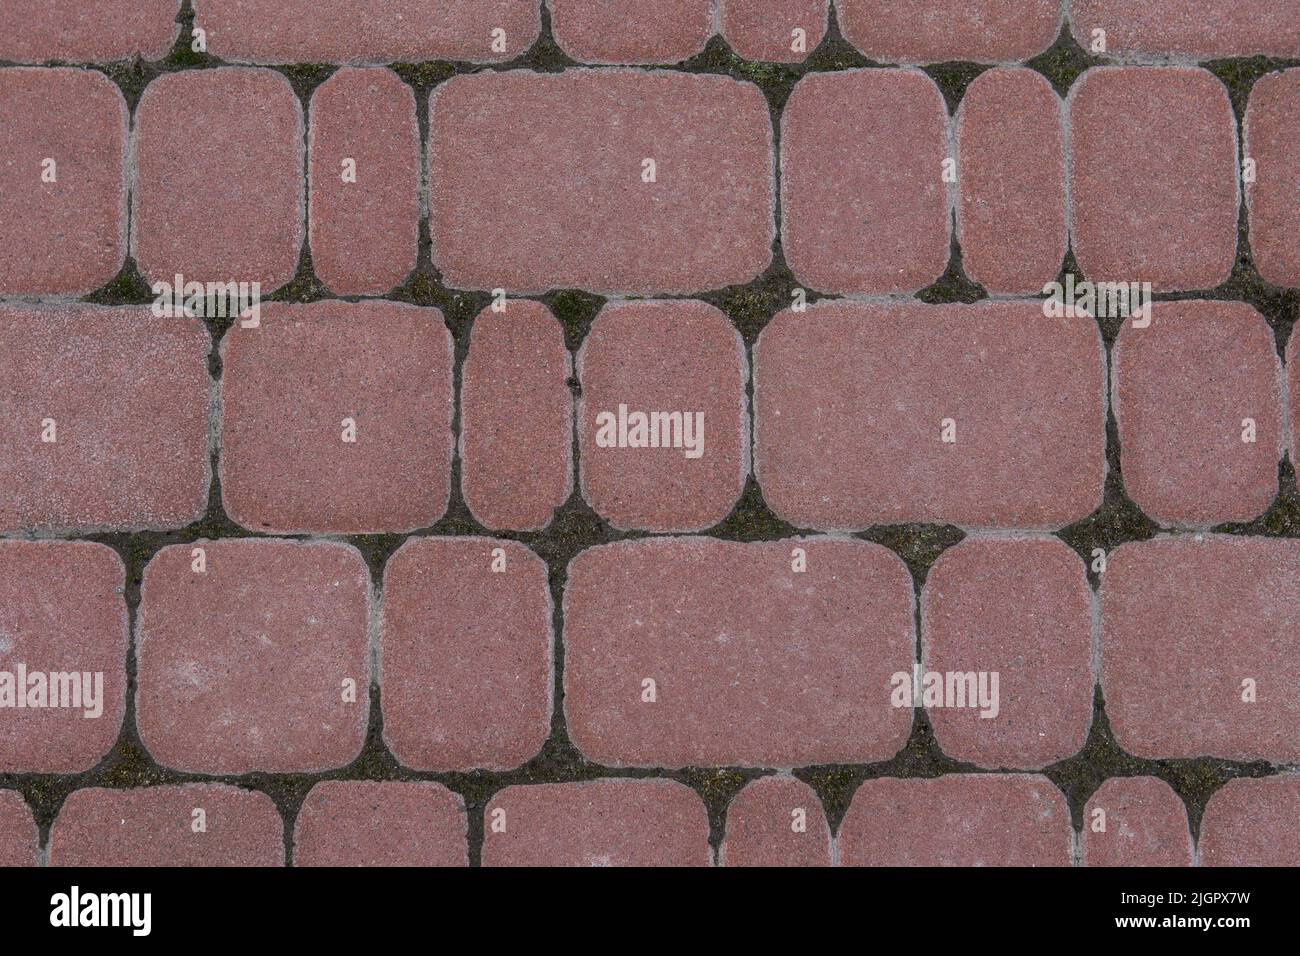 Road tiles of different sizes. Top view. The uneven pink color of the tile makes it look like a natural stone. Footpath. Urabism Stock Photo